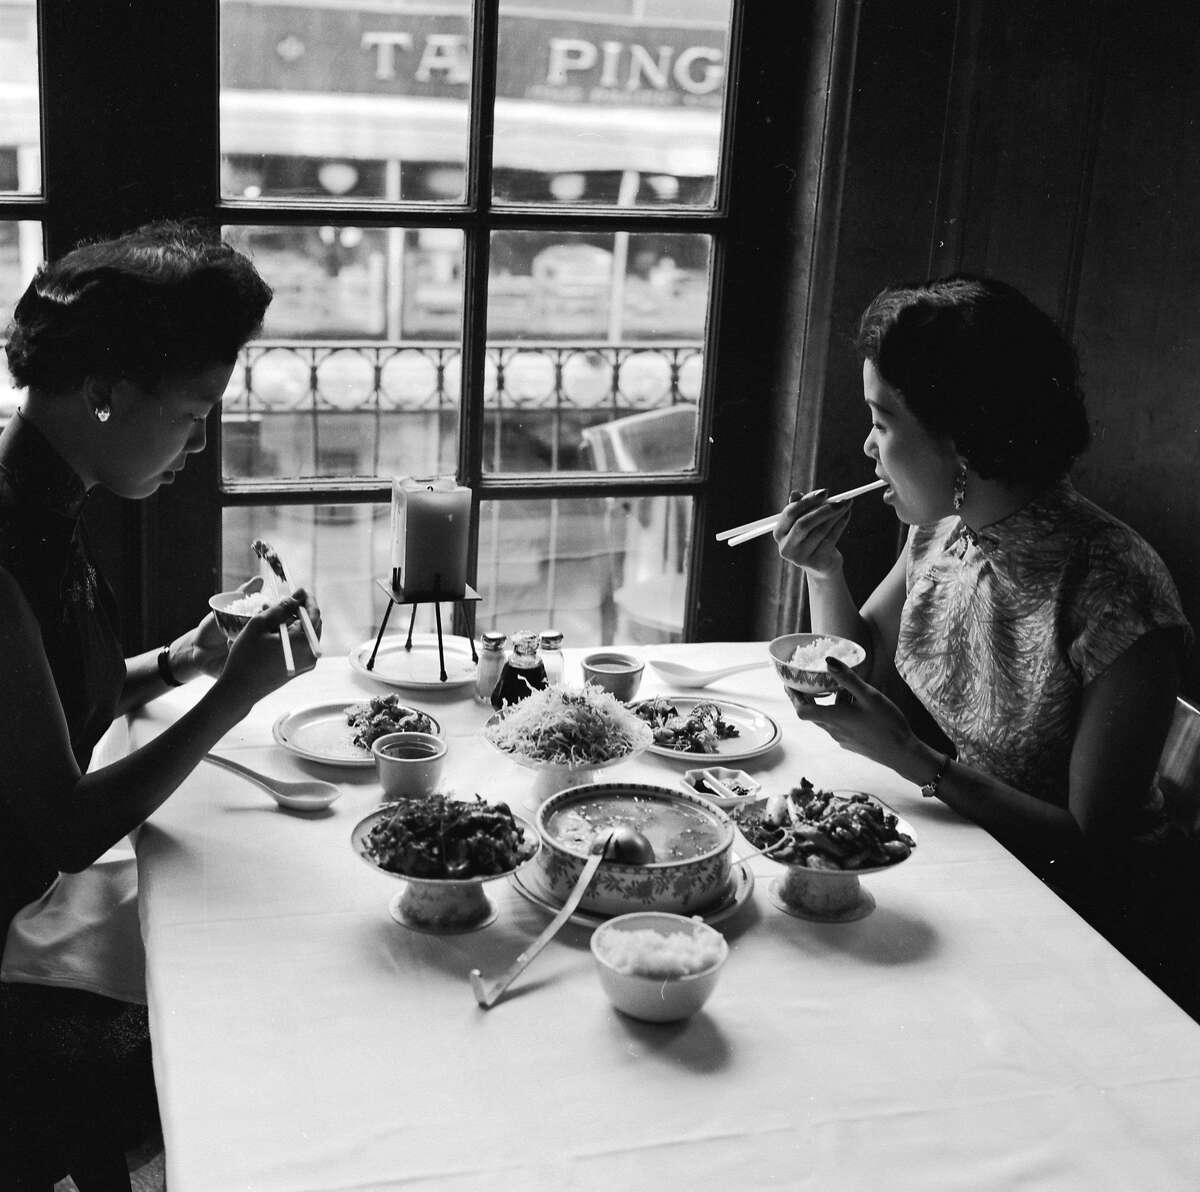 circa 1955: Two women sample the bird's nest soup and other delicacies on offer at Johnny Kan's famous Chinese restaurant in Chinatown, San Francisco. (Photo by Orlando /Three Lions/Getty Images)